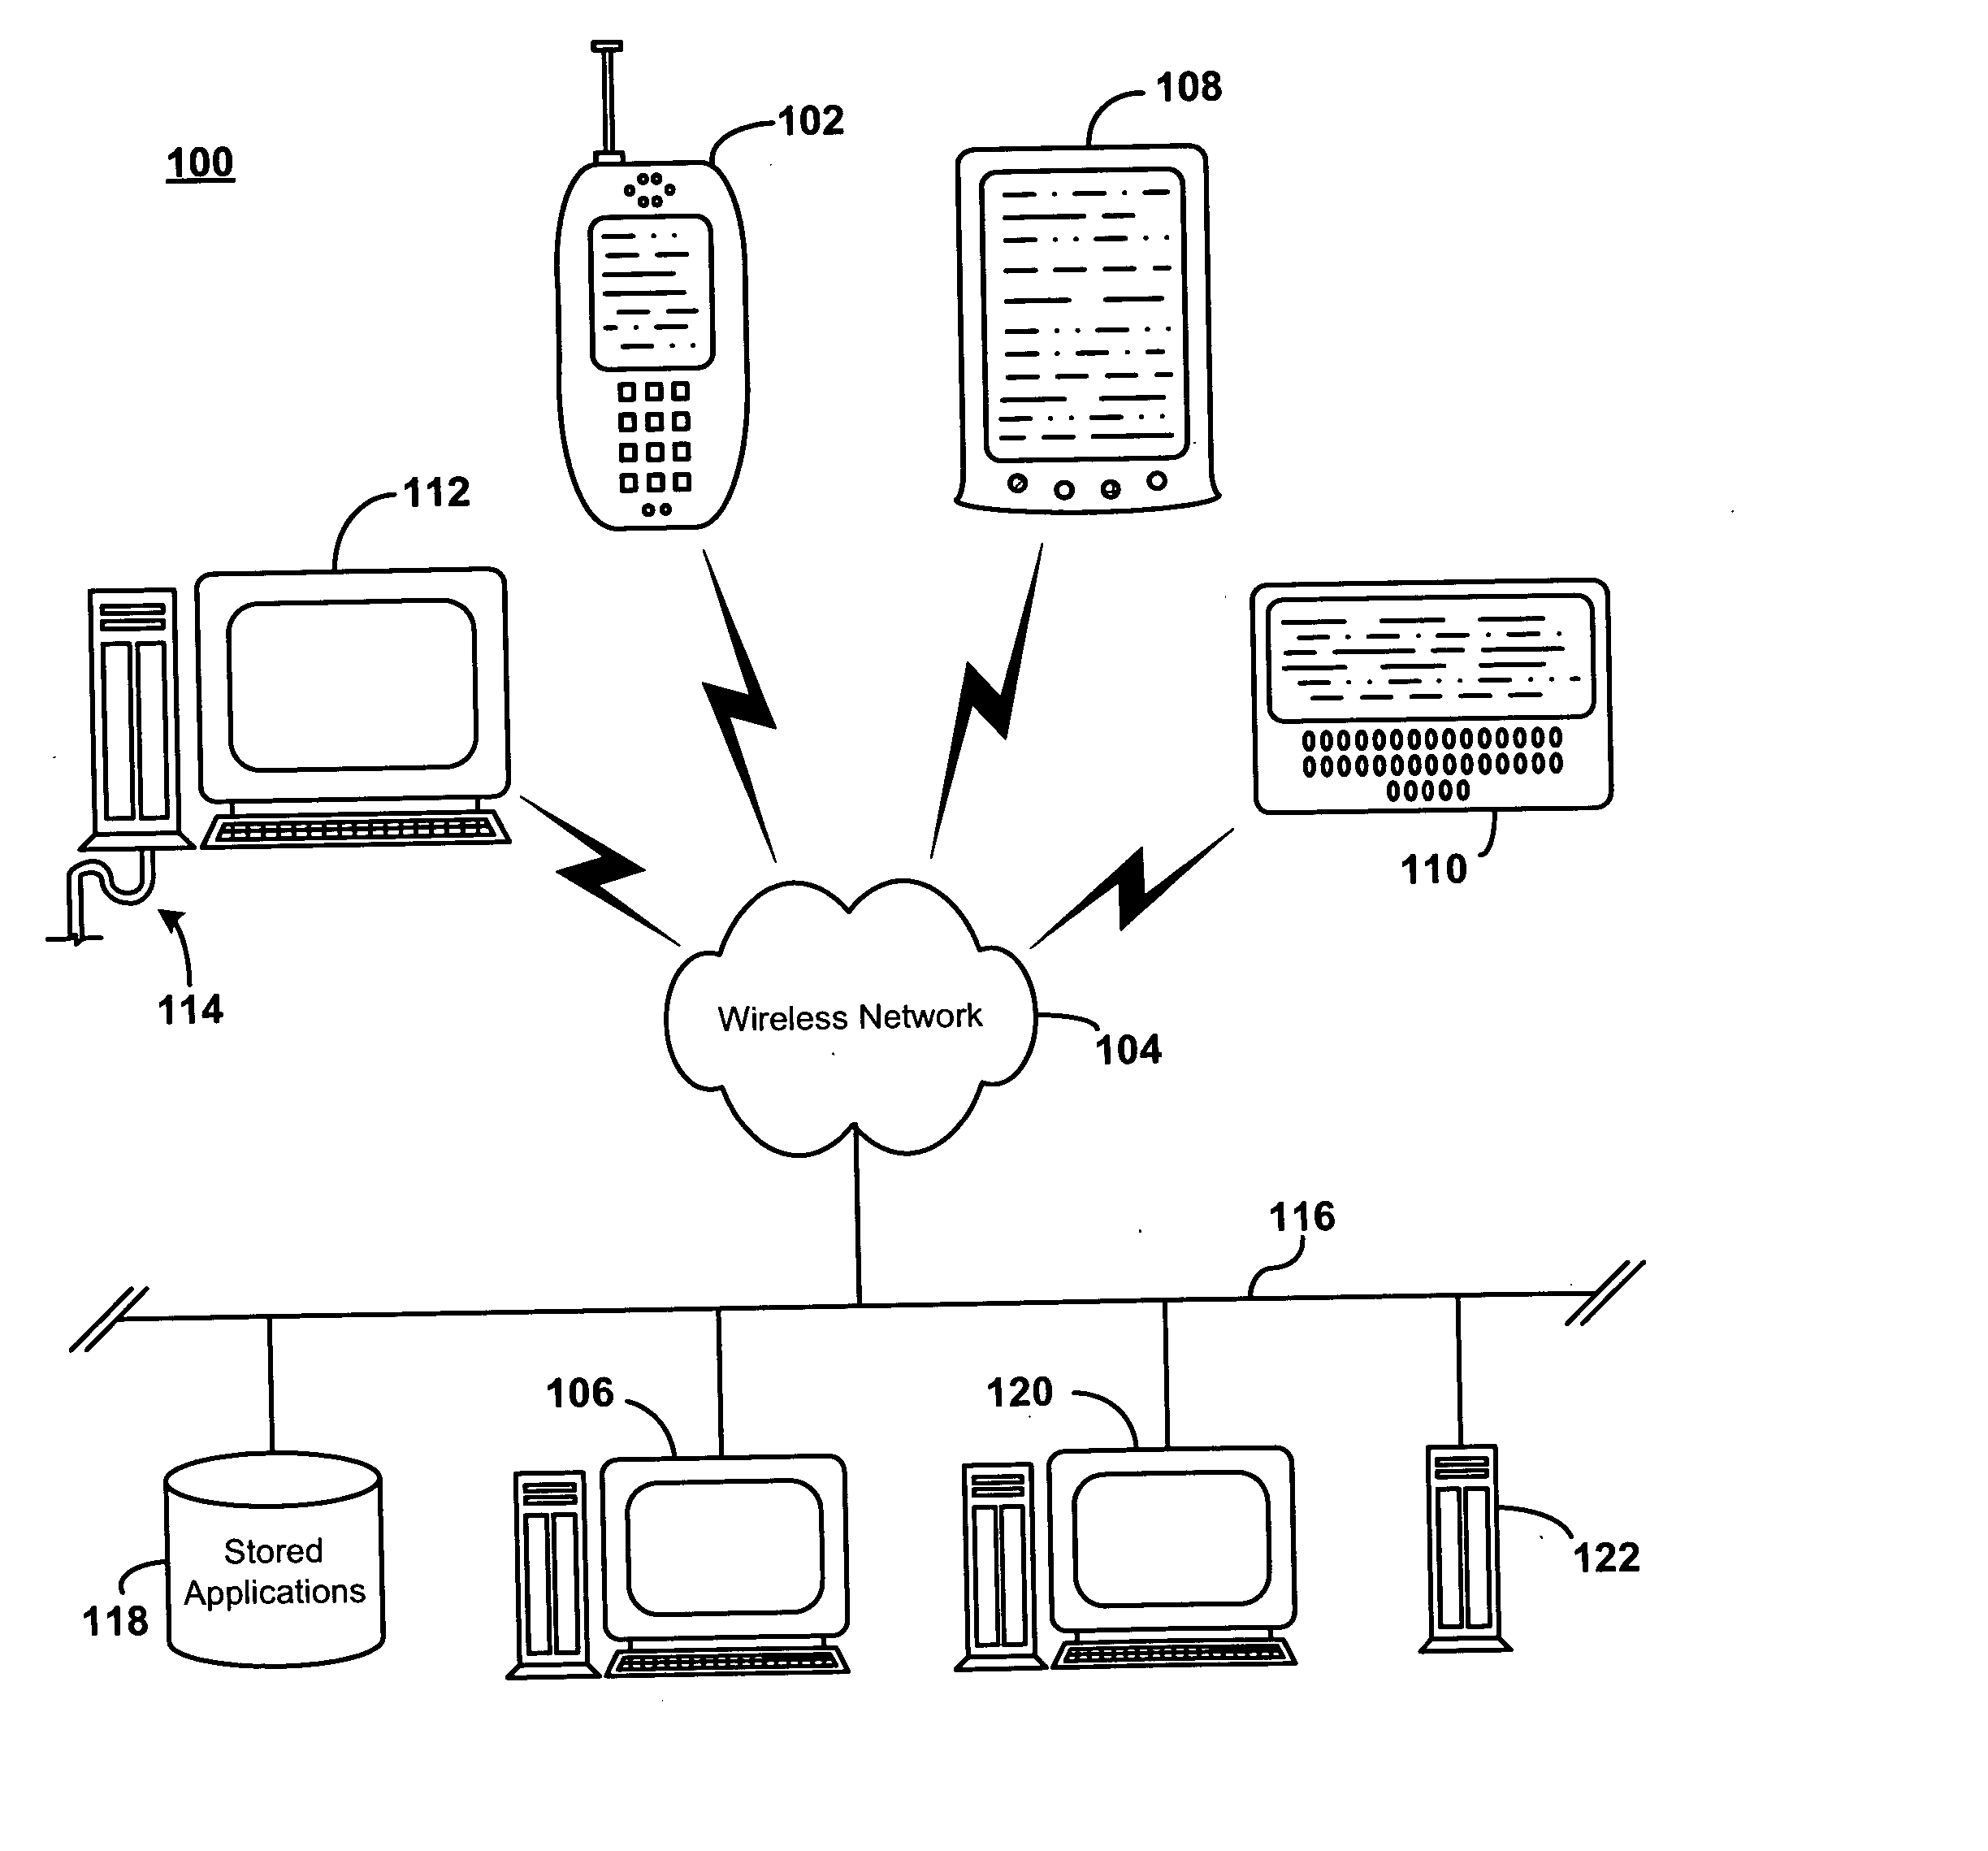 System and method for dynamically simulating devices at a computing device